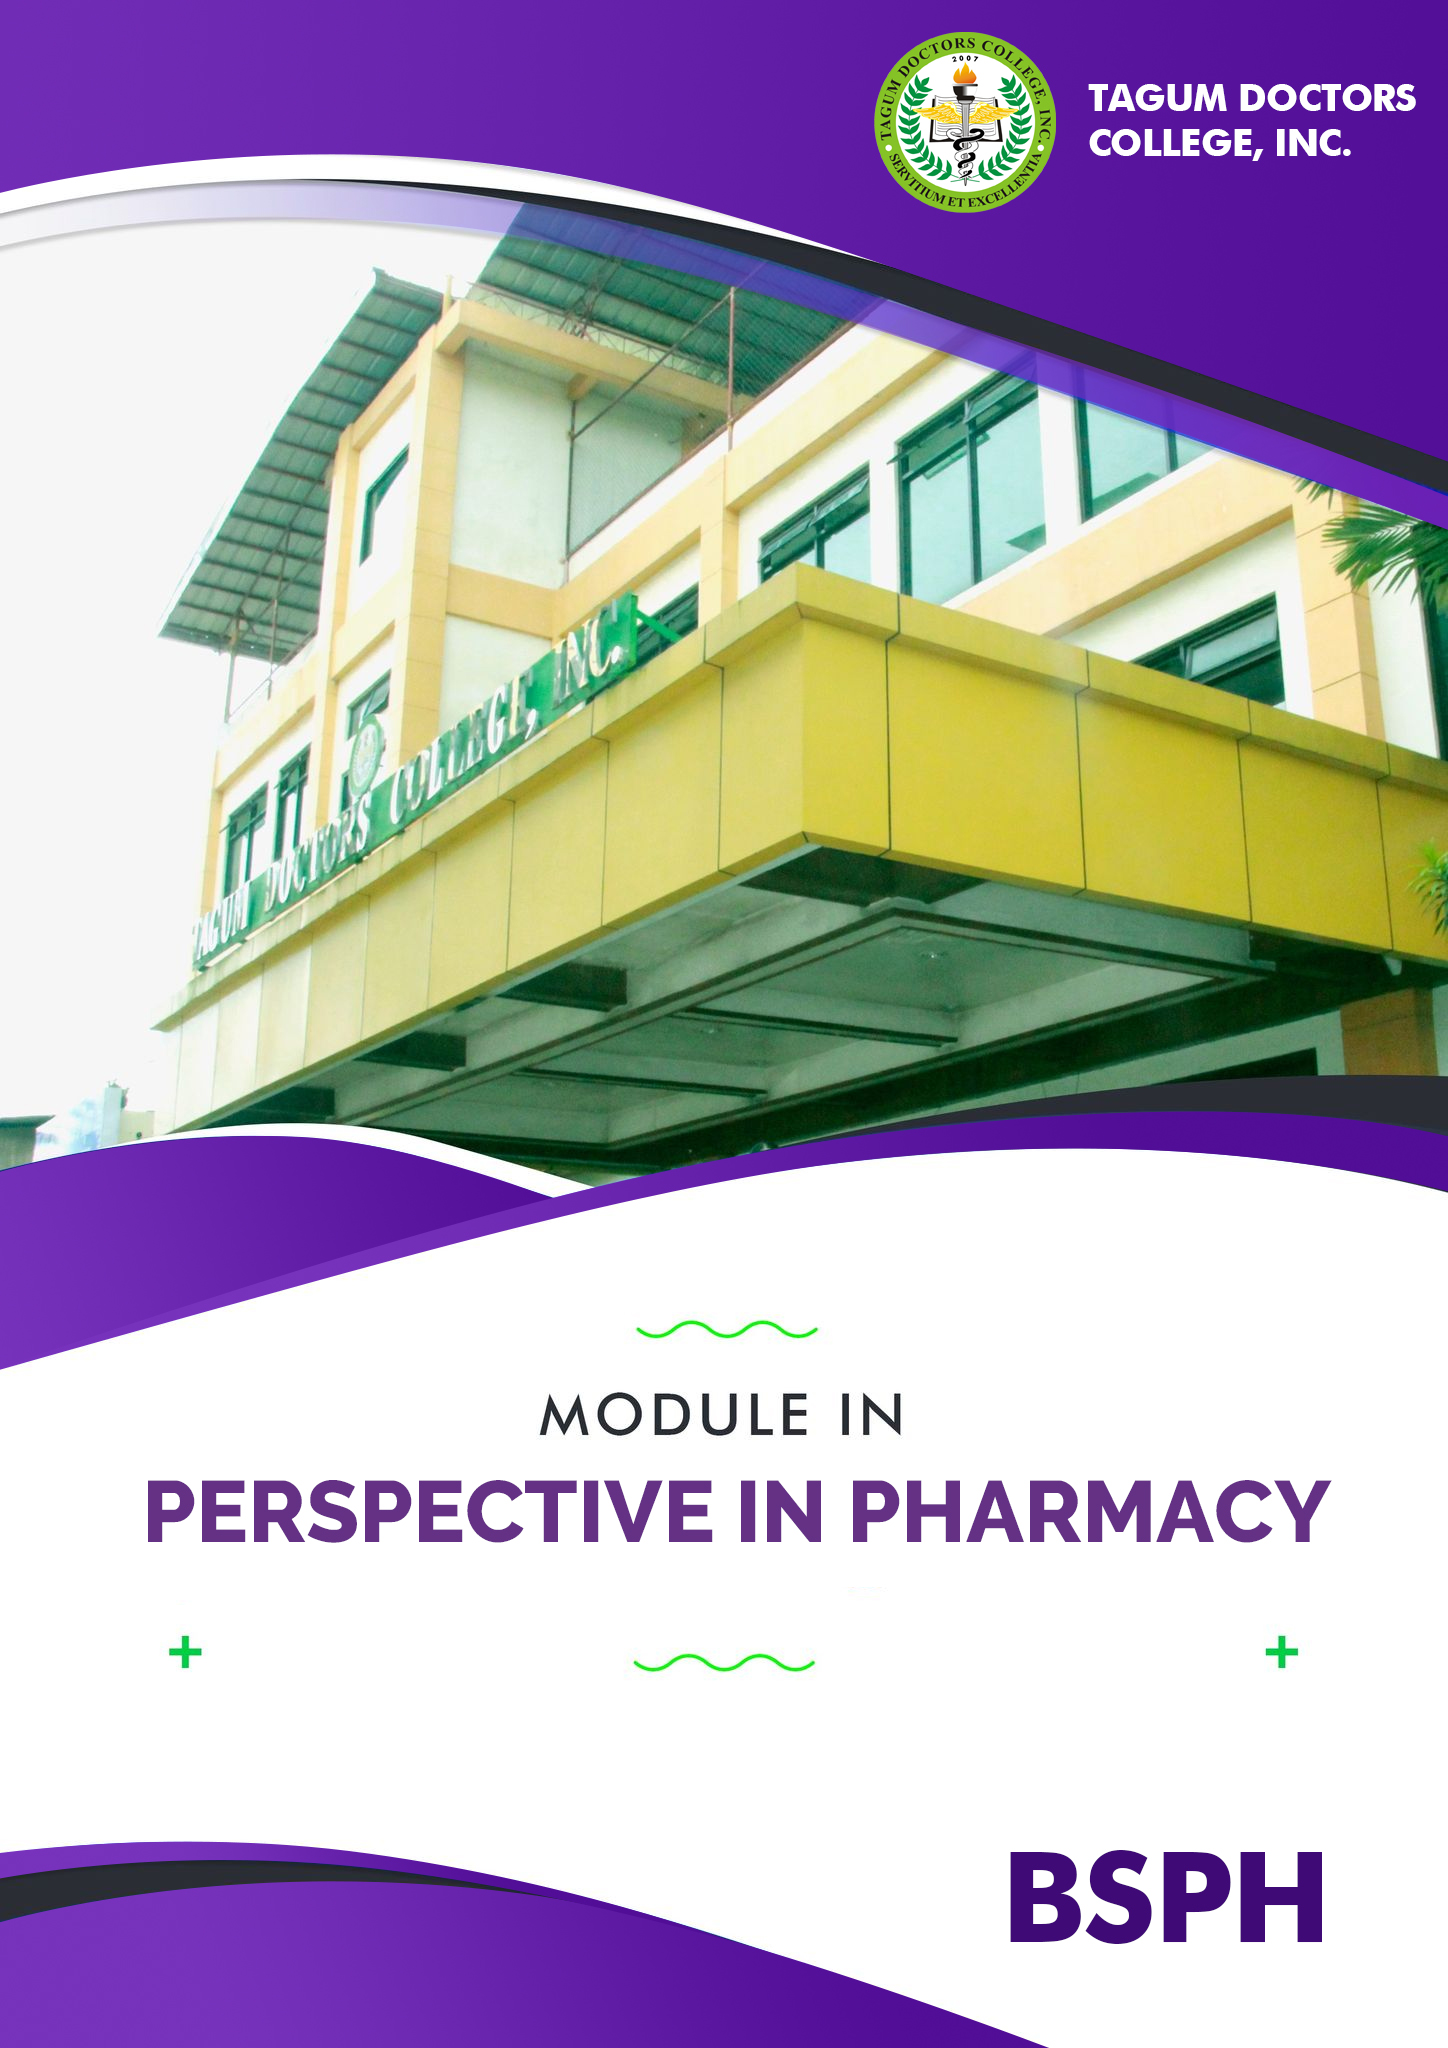 Perspectives in Pharmacy - BSPh 1A